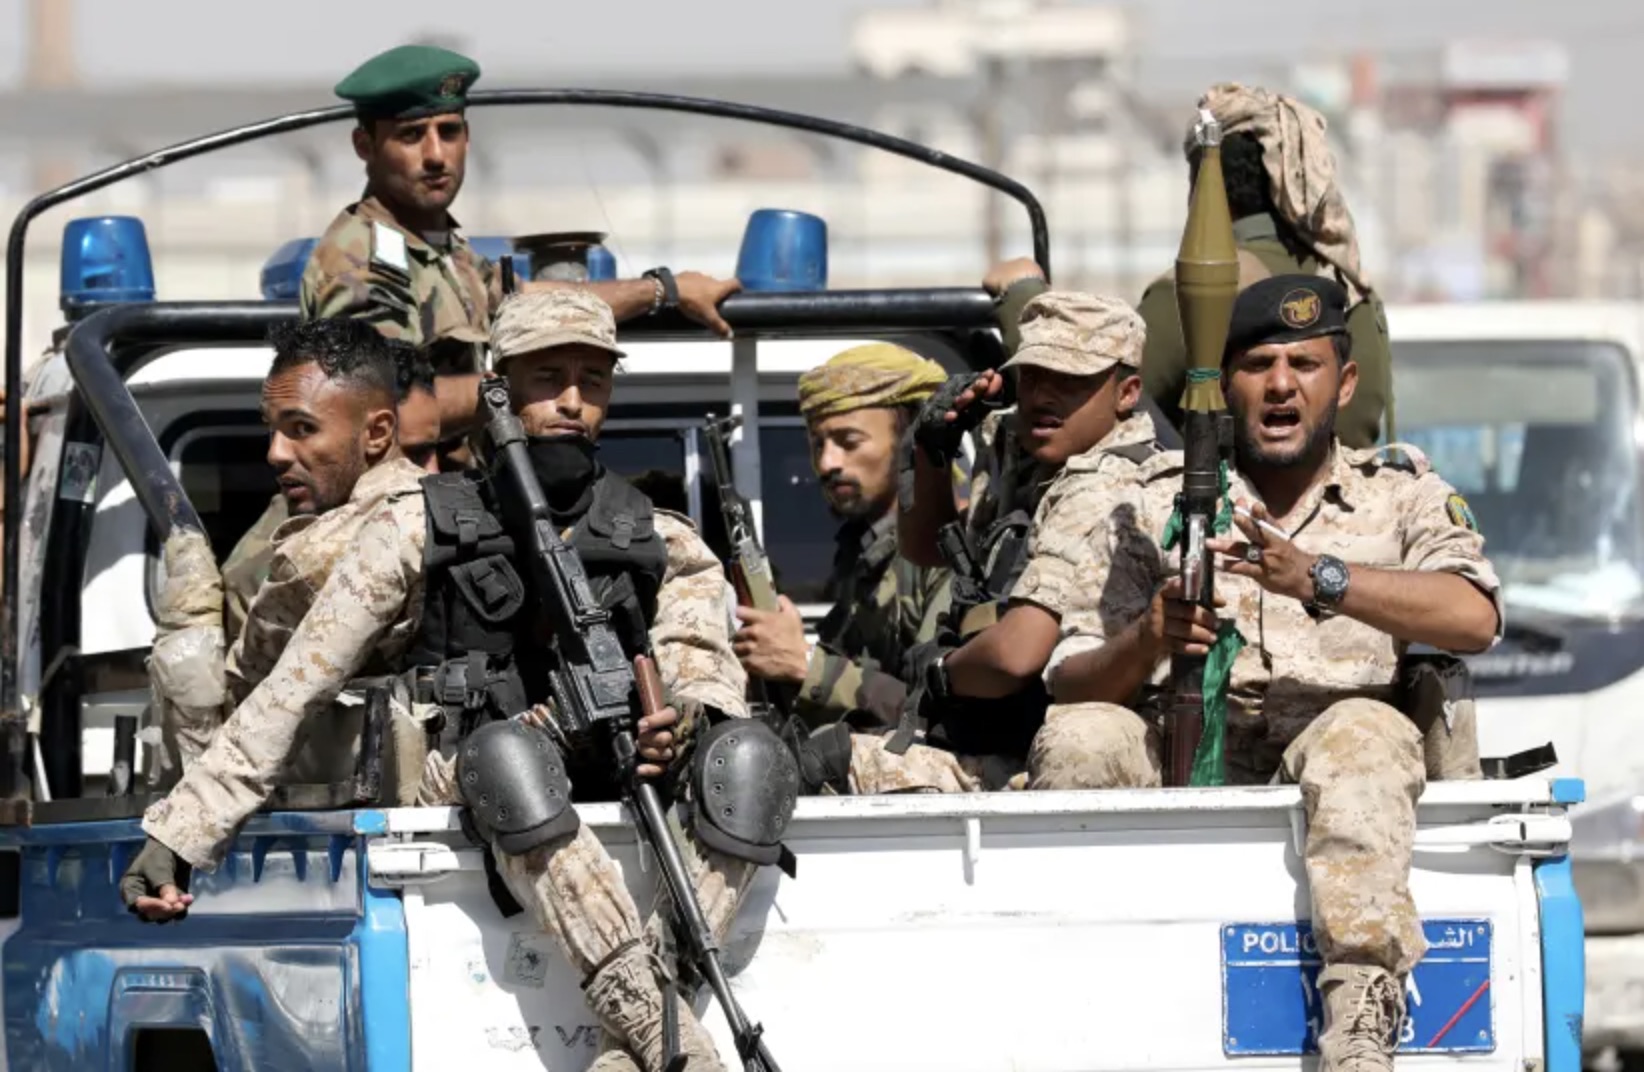 Houthi troops ride on the back of a police patrol truck after participating in a Houthi gathering in Sanaa, Yemen February 19, 2020. (photo credit: KHALED ABDULLAH/ REUTERS)